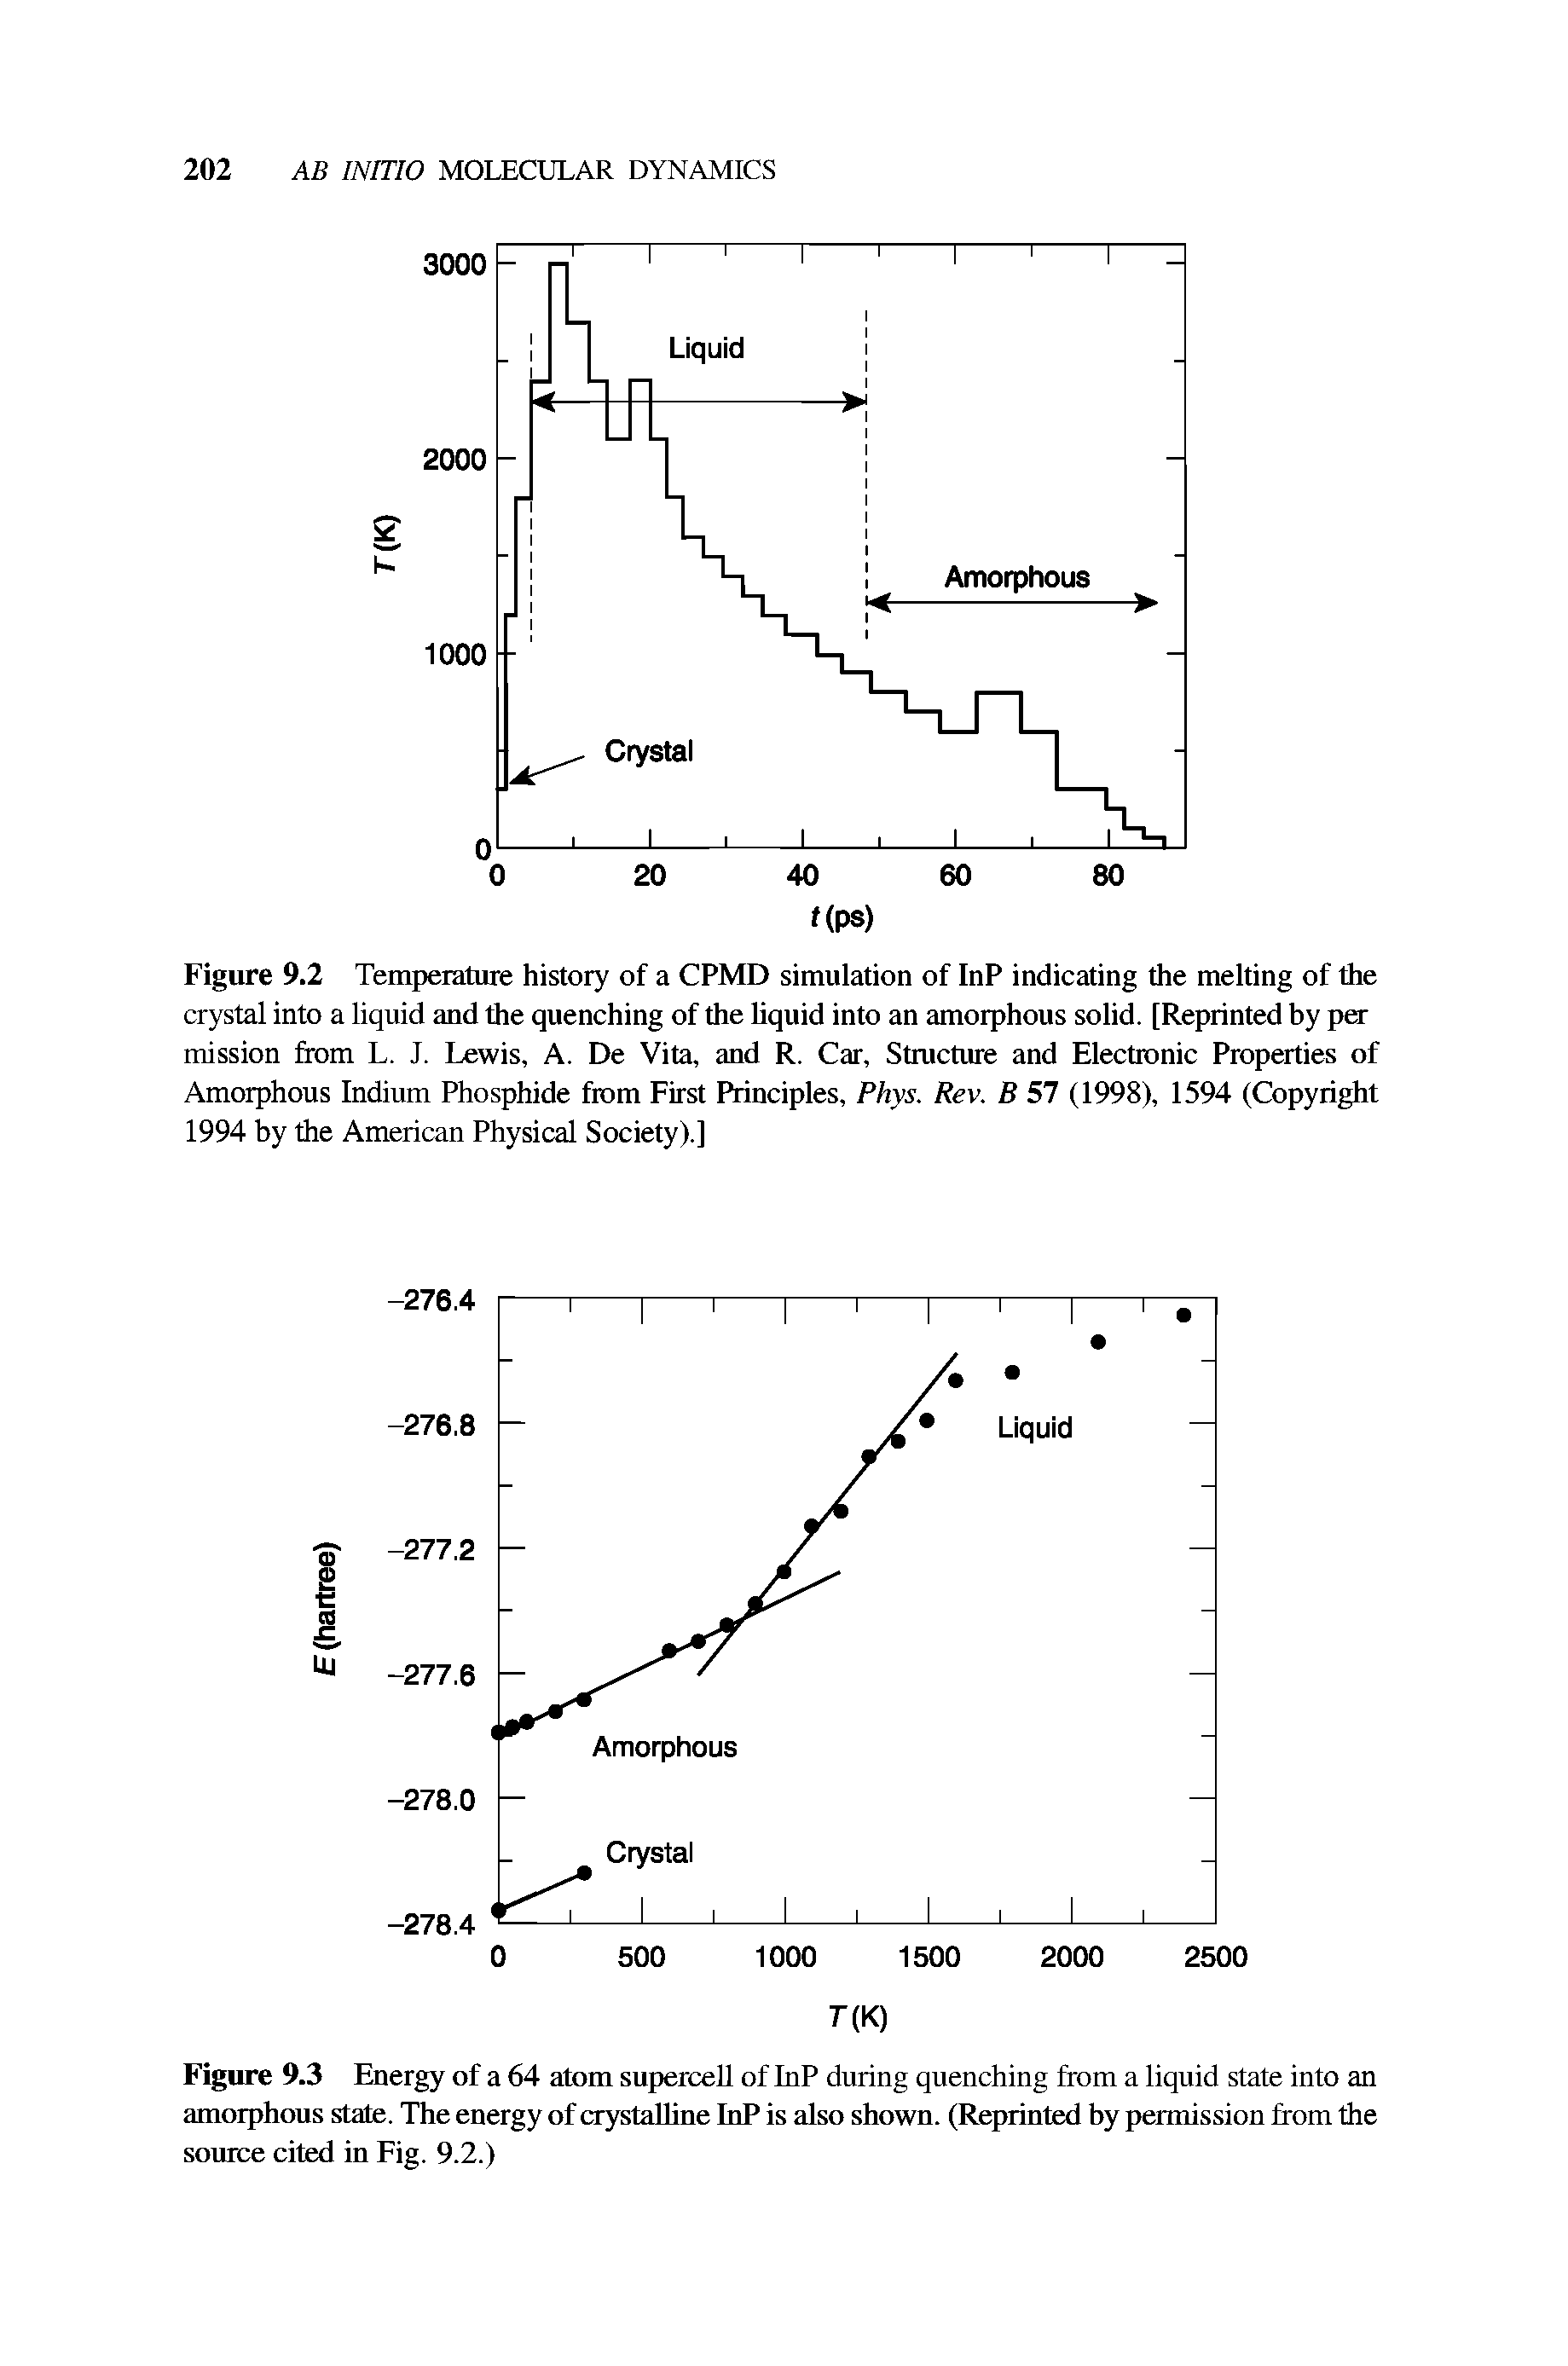 Figure 9.2 Temperature history of a CPMD simulation of InP indicating the melting of the crystal into a liquid and the quenching of the liquid into an amorphous solid. [Reprinted by per mission from L. J. Lewis, A. De Vita, and R. Car, Structure and Electronic Properties of Amorphous Indium Phosphide from First Principles, Phys. Rev. B 57 (1998), 1594 (Copyright 1994 by the American Physical Society).]...